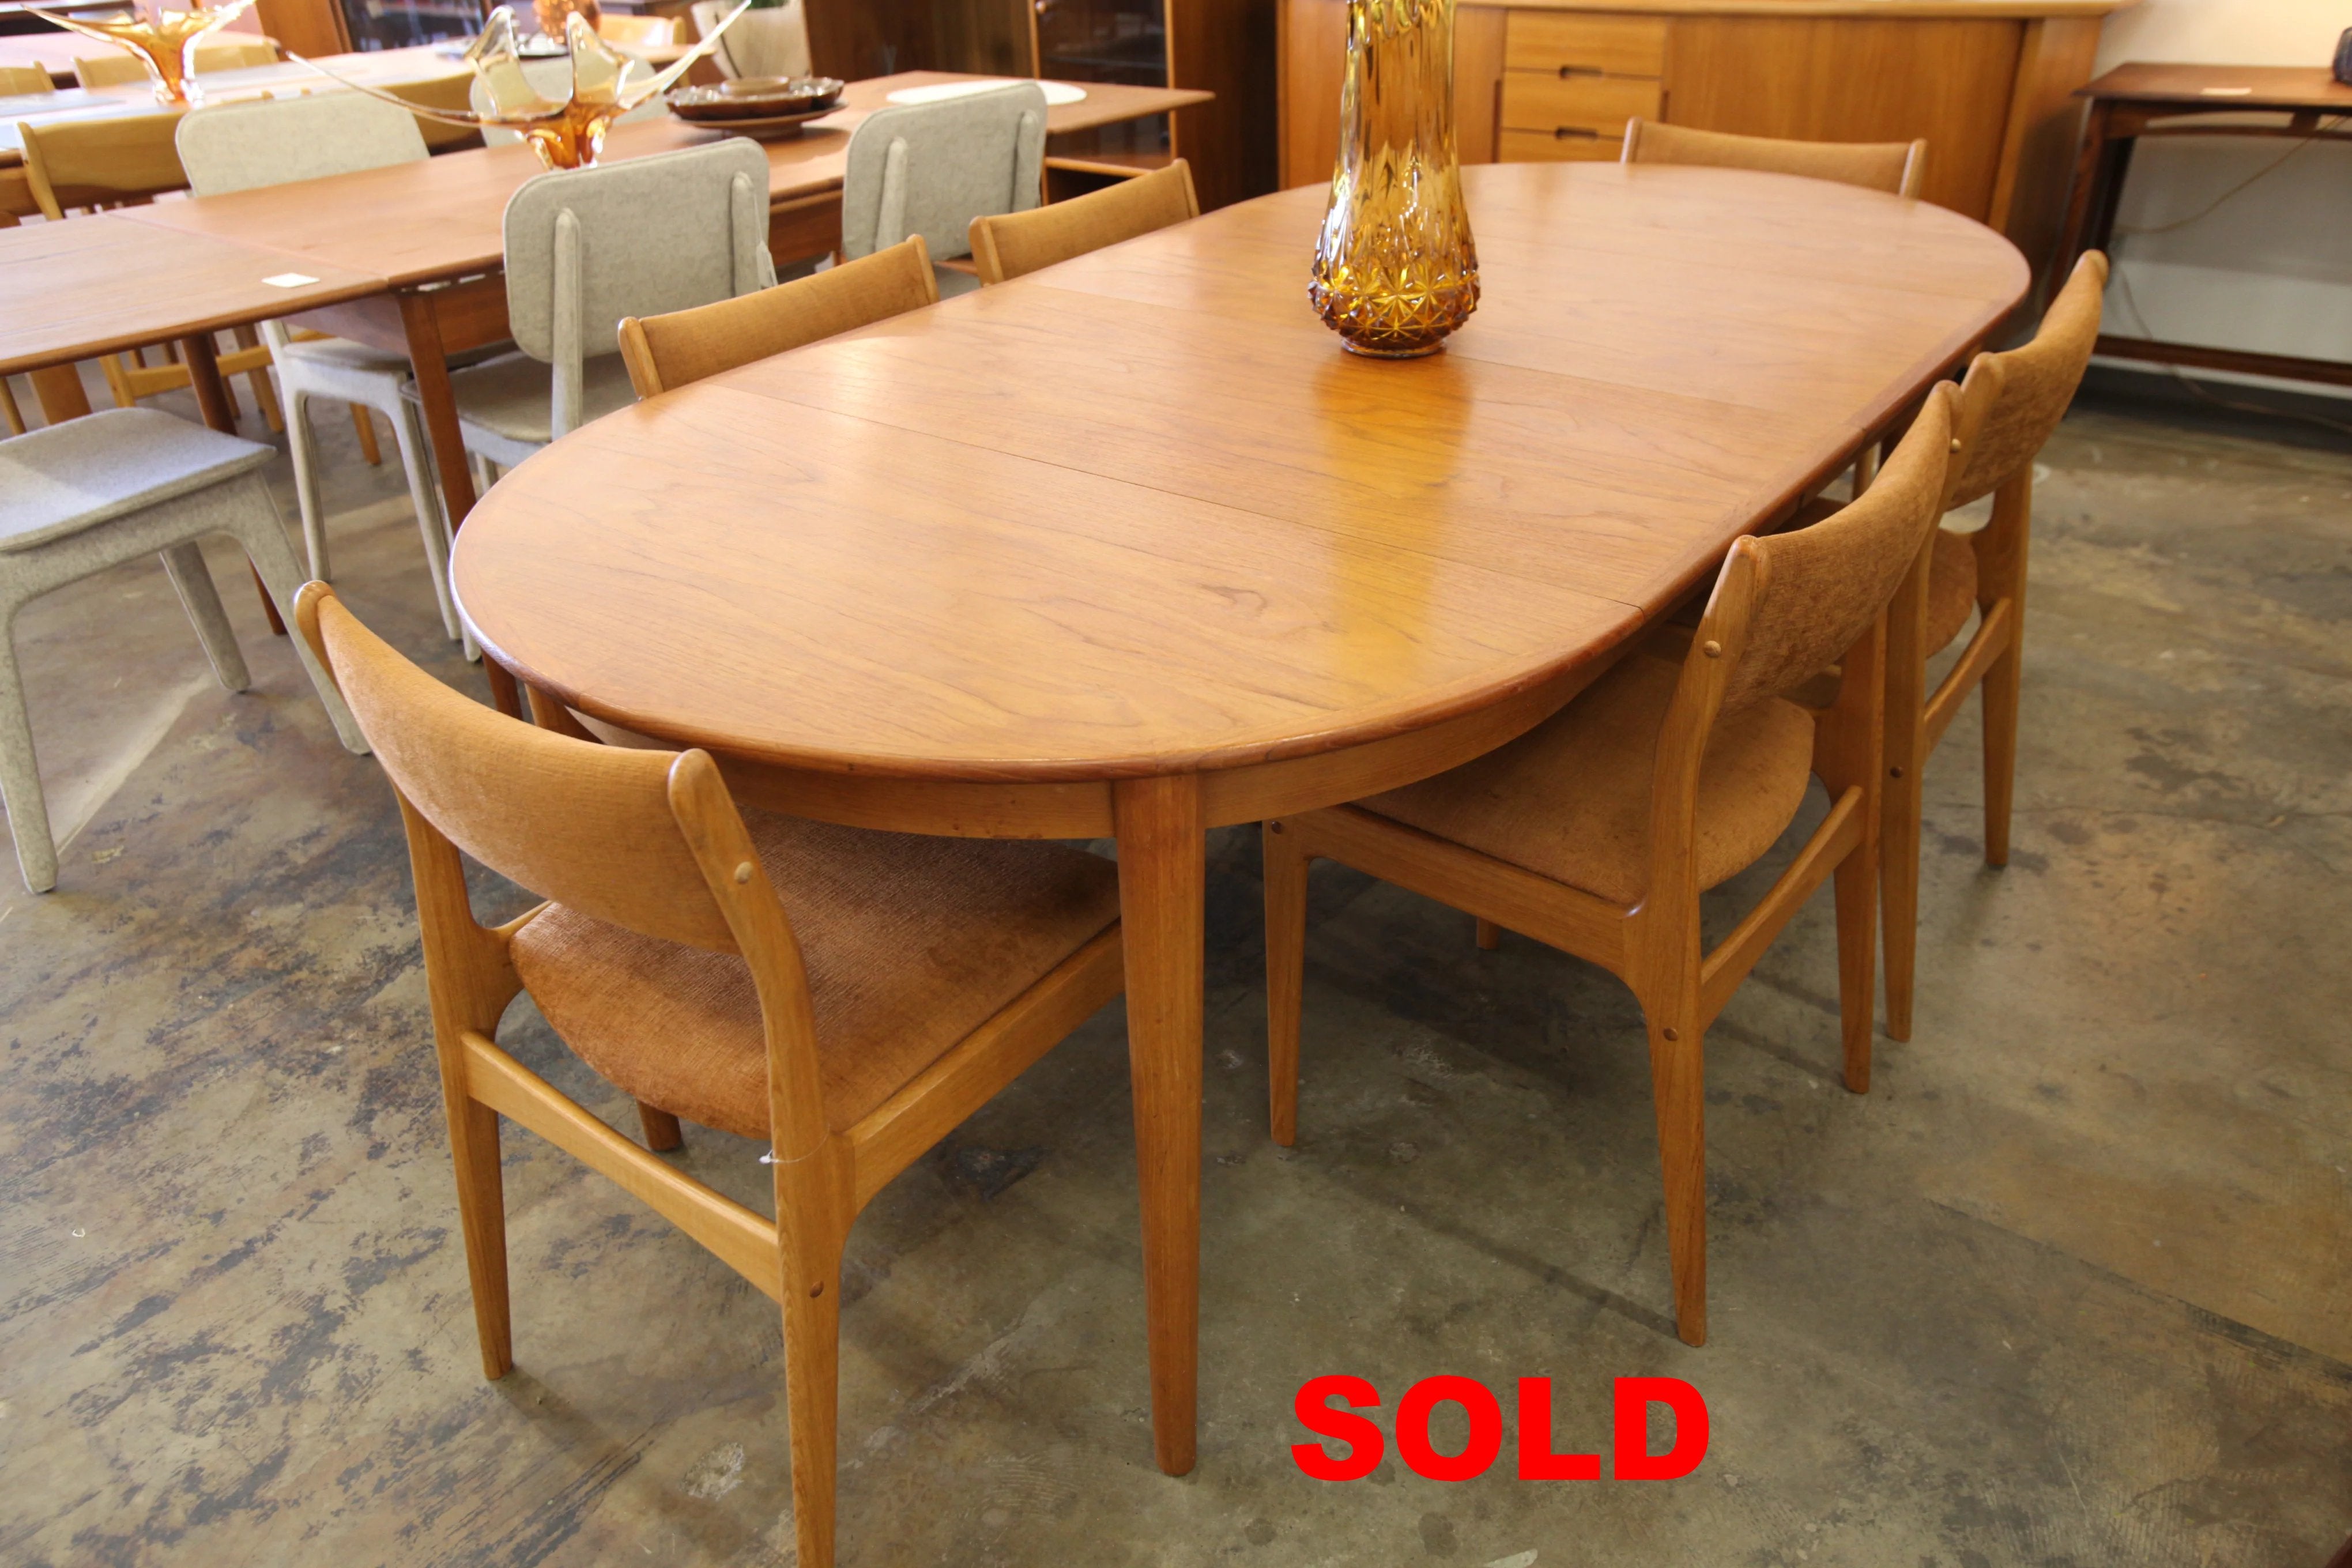 Vintage Round Danish Teak Dining Table w/ 2 Leafs by Torring & MSE Mobler